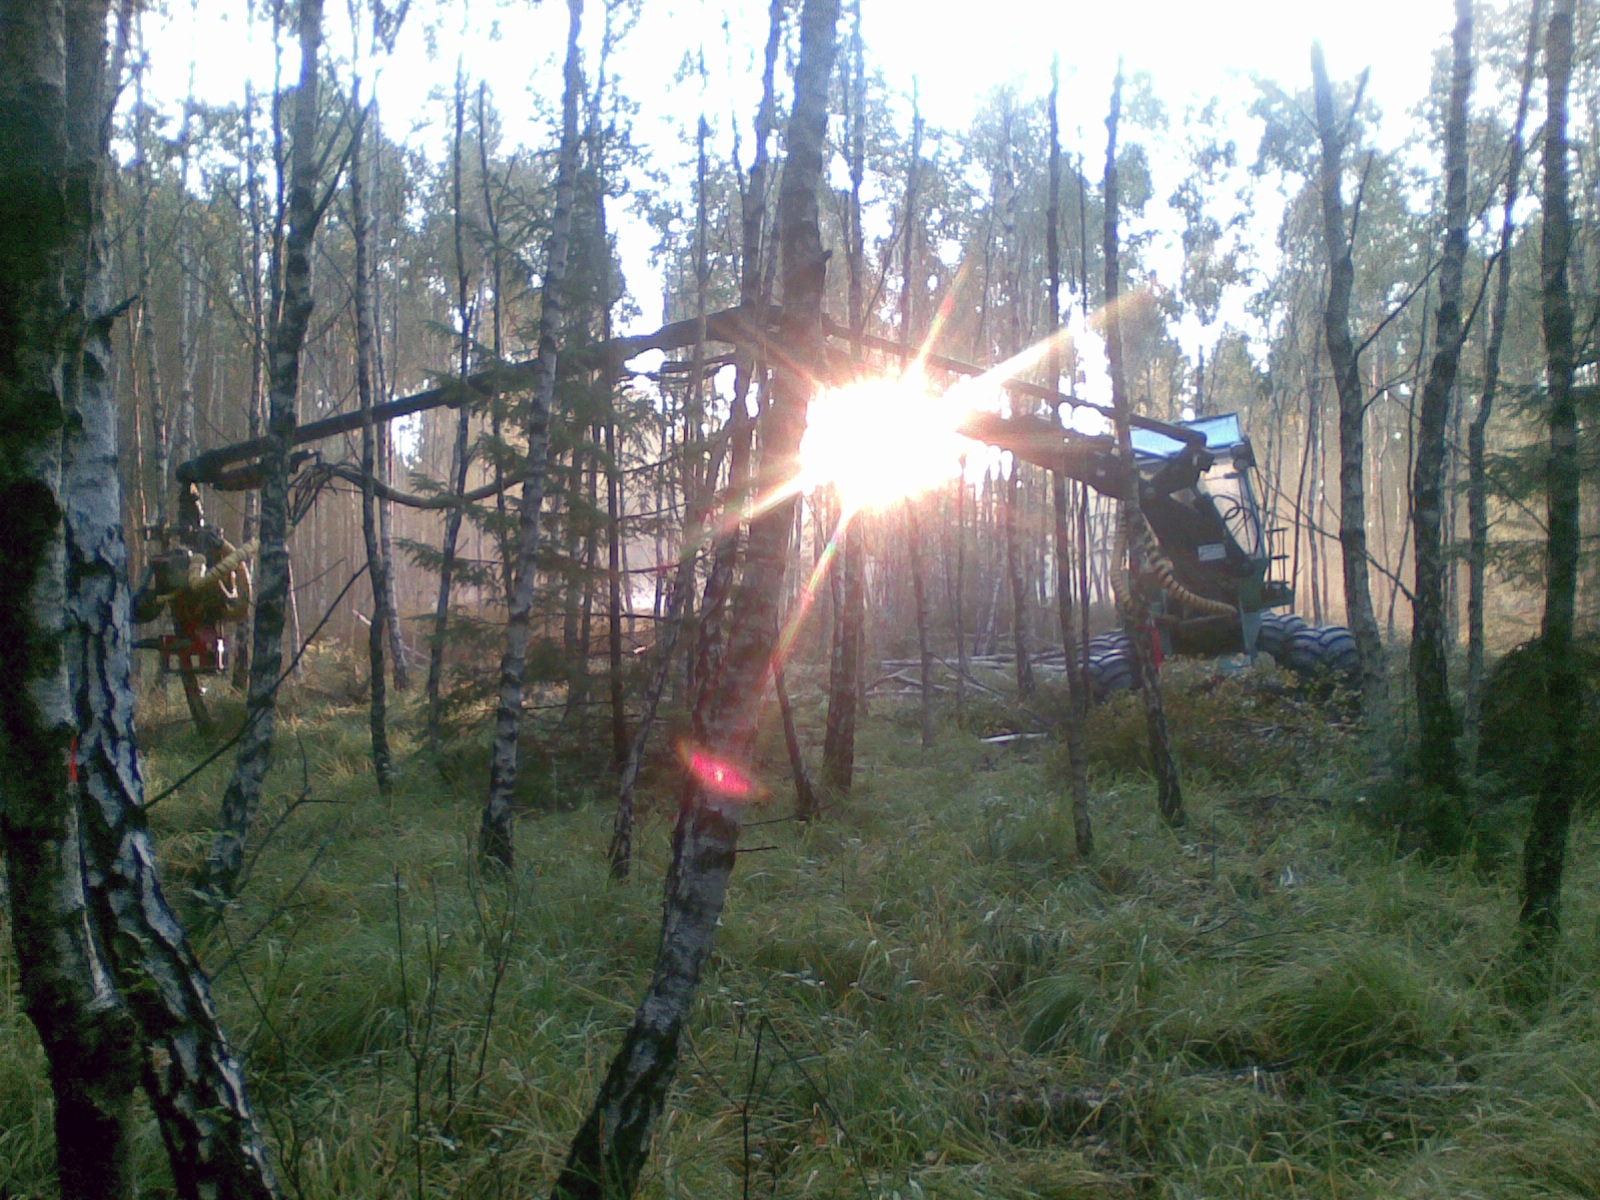 A harvester does the last bit of weeding before sunset, in a birch forest somewhere in southern Sweden. Photo by courtesy of Dan Bergström.